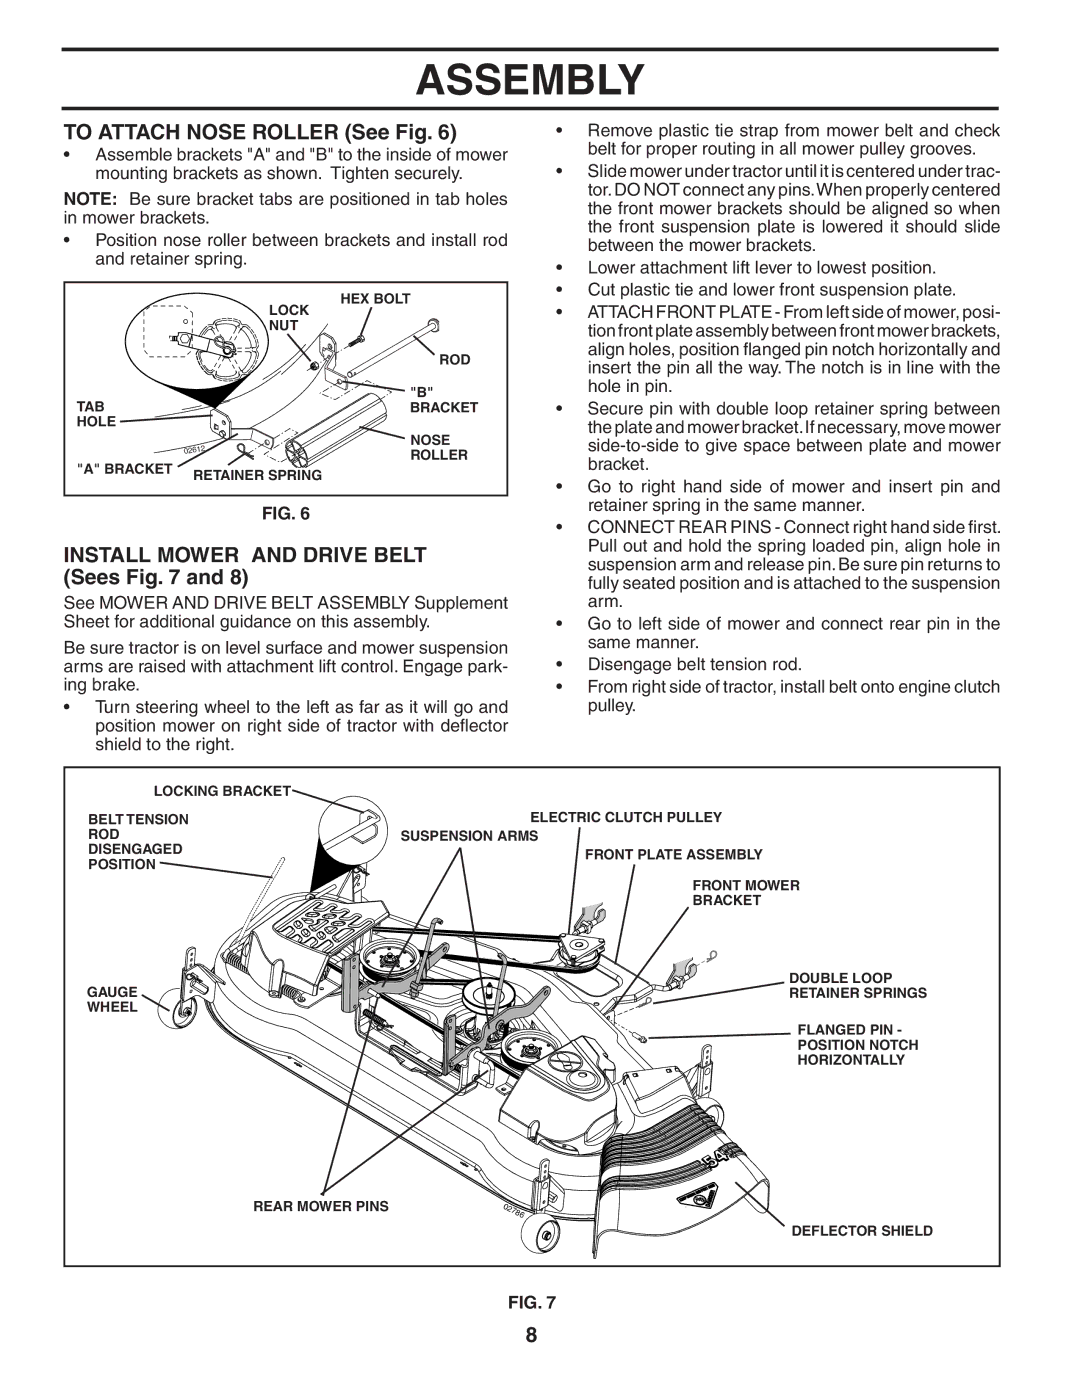 Poulan 195806 manual To Attach Nose Roller See Fig, Install Mower and Drive Belt Sees 